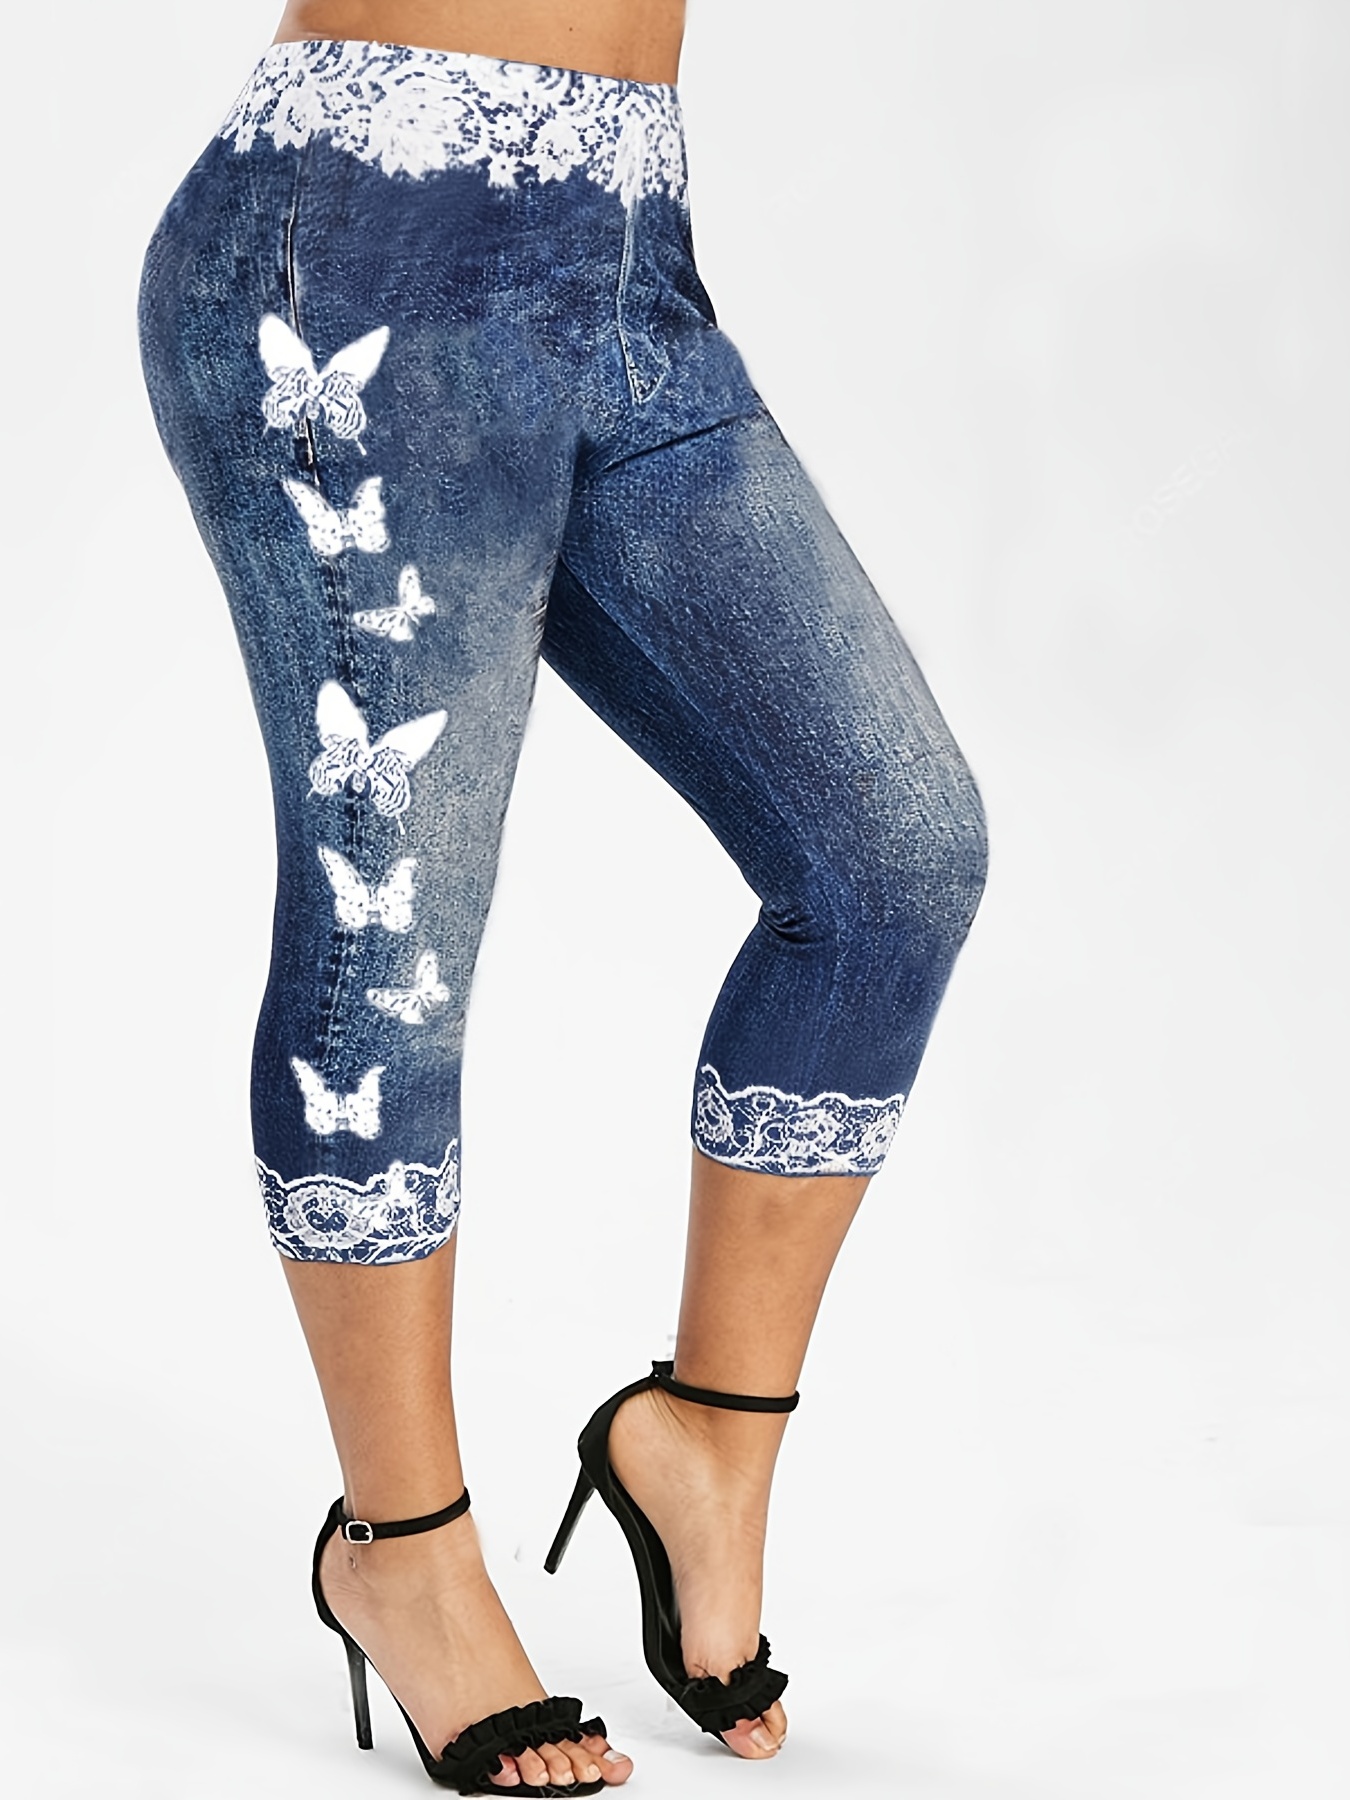 Butterfly Insect Print Yoga Trousers - Women Adult High Waist